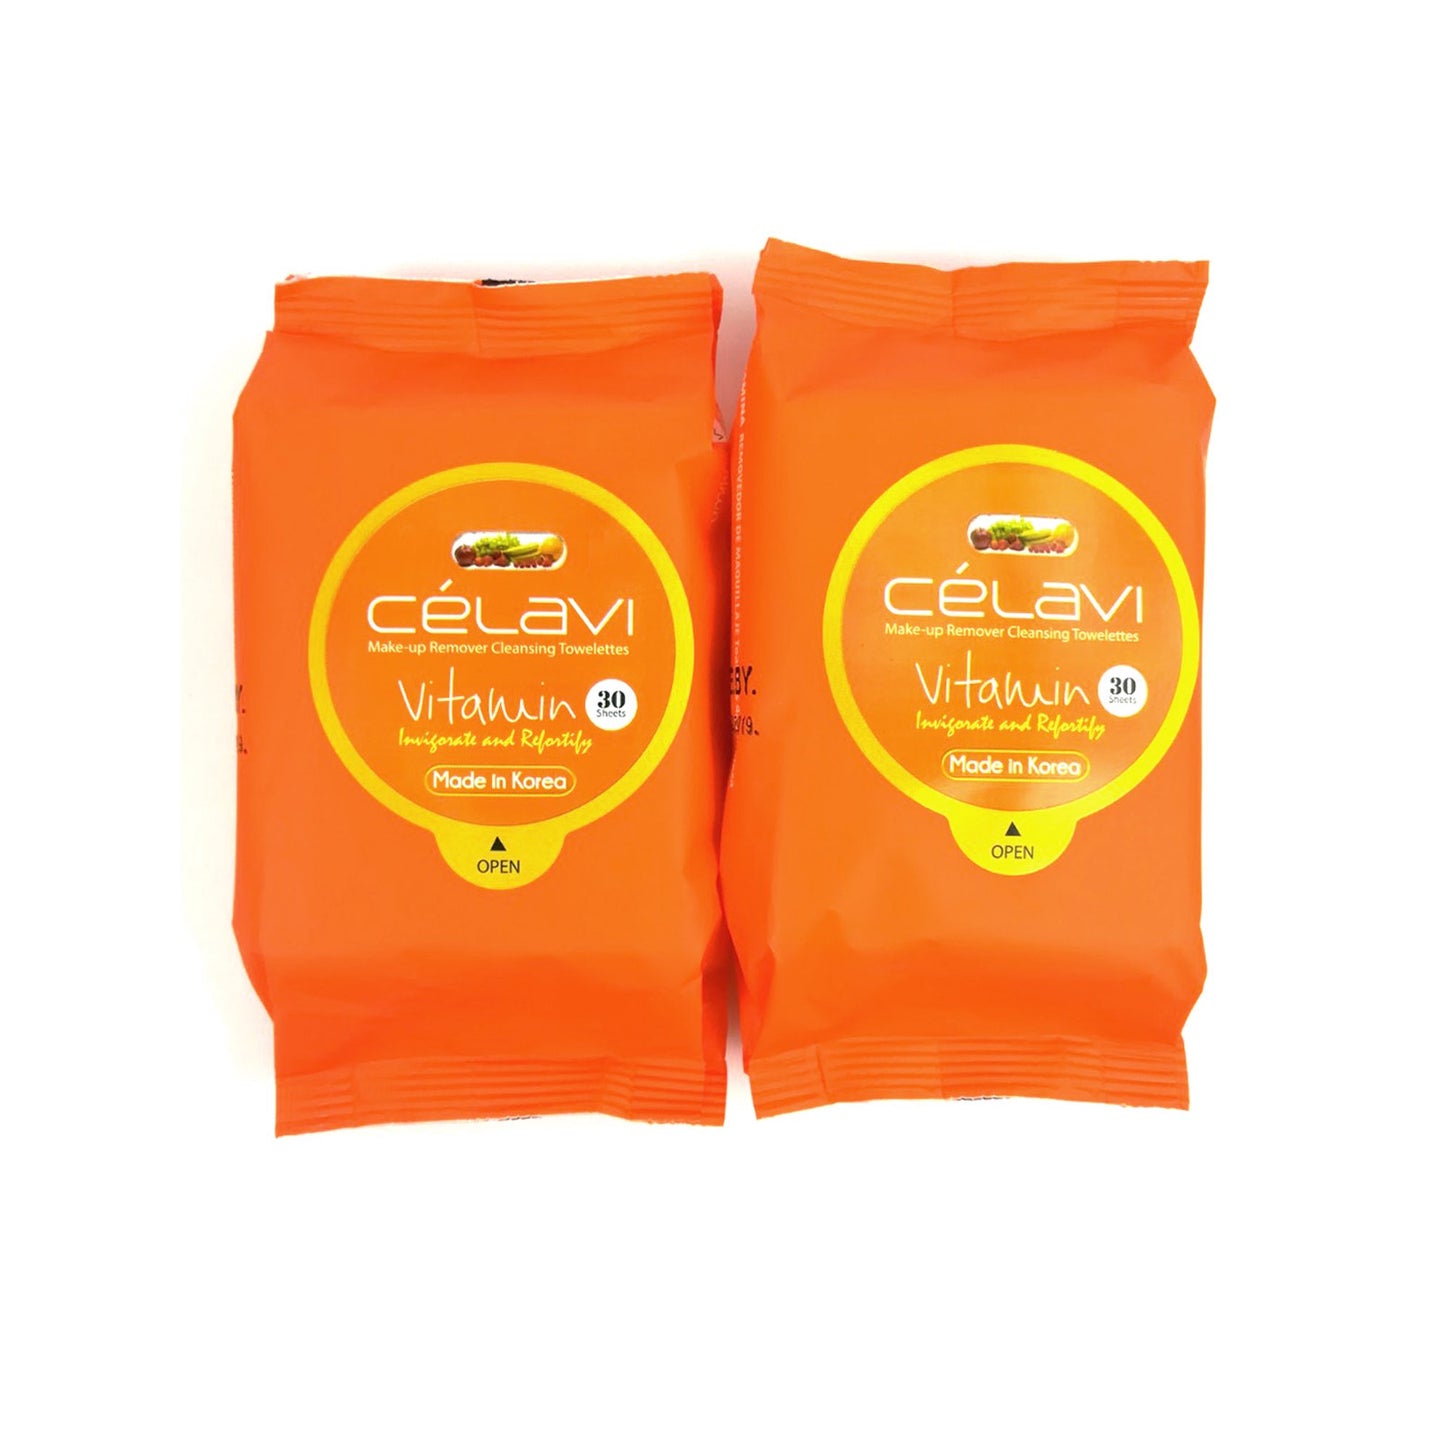 Celavi Vitamin Makeup Remover Cleansing Wipes (Pack of 2)